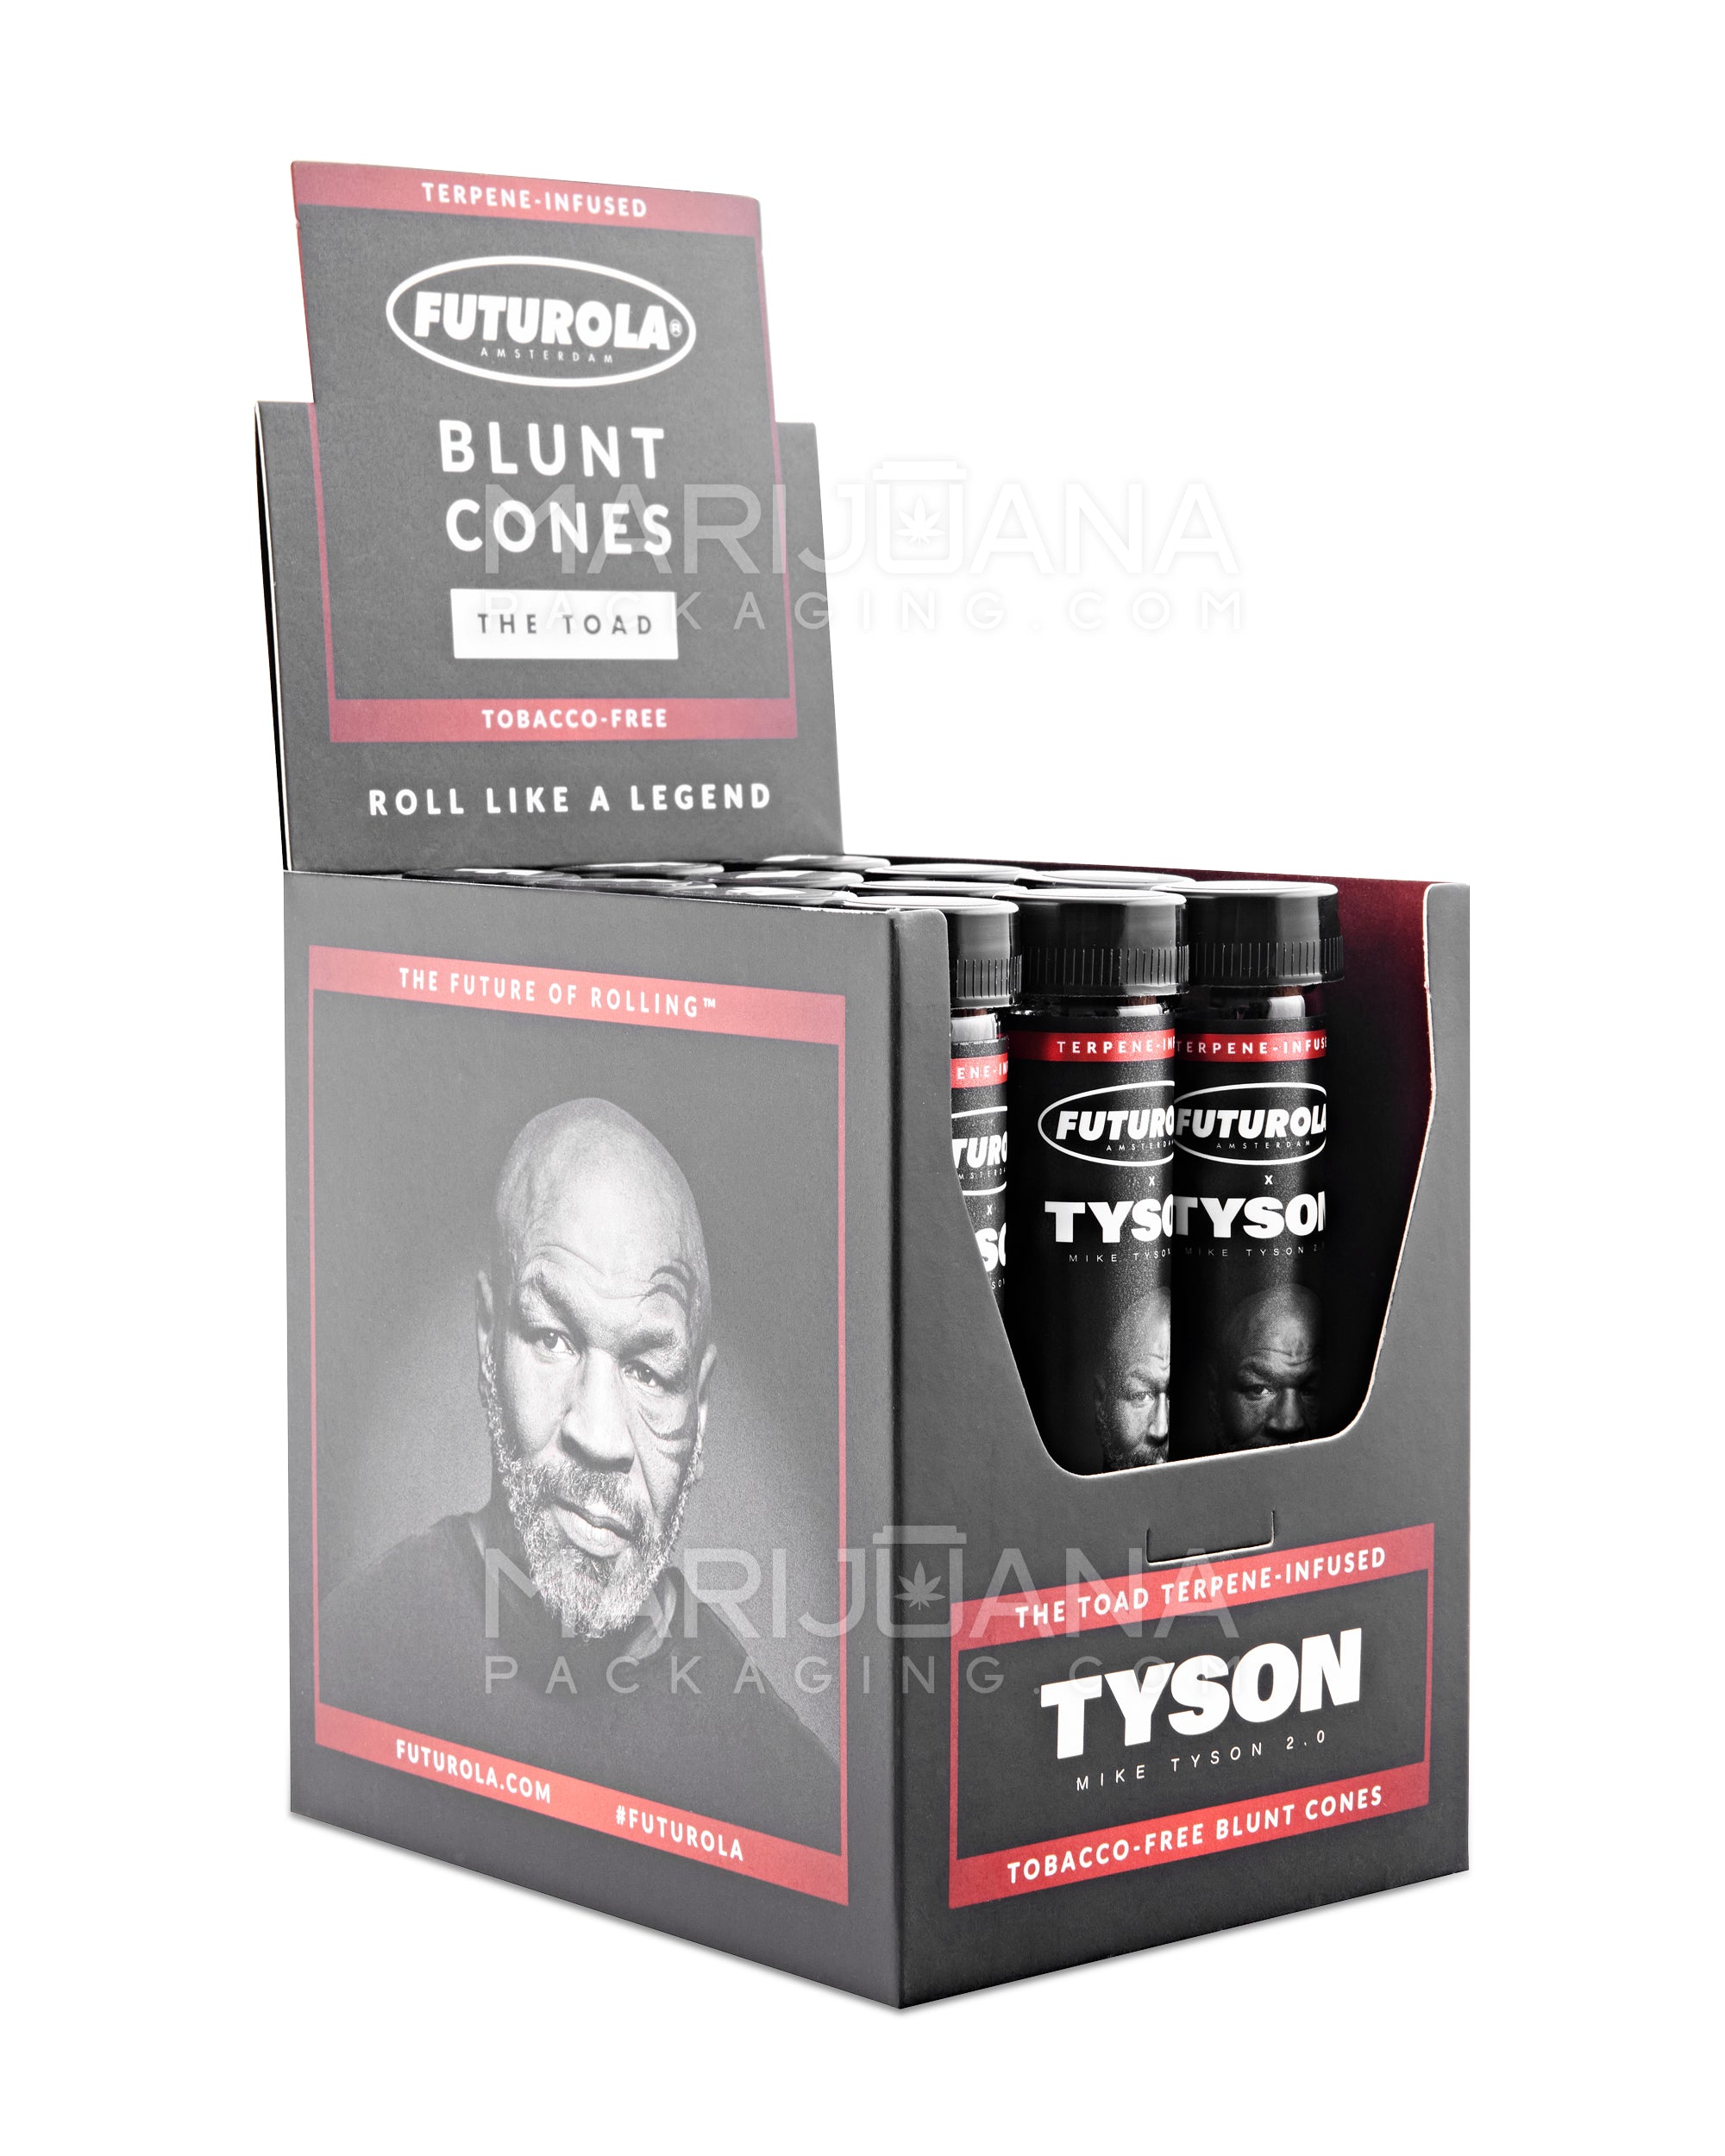 FUTUROLA | 'Retail Display' Tyson Ranch 2.0 "The Toad" King Size Terpene Infused Pre-Rolled Blunt Cones | 109mm - Blunt Paper - 12 Count